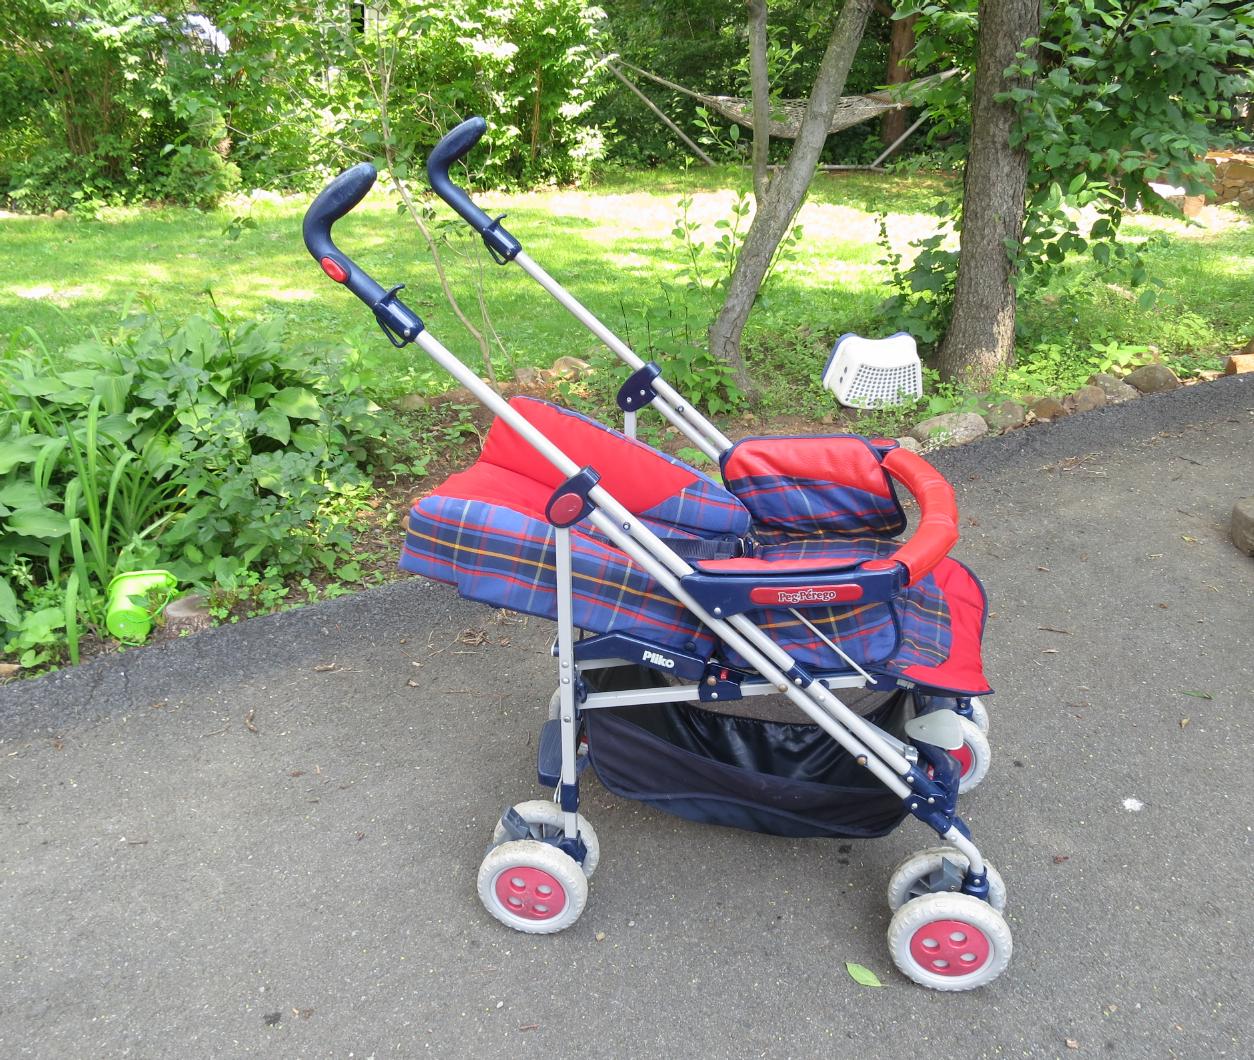 Offspring Carriage Devices